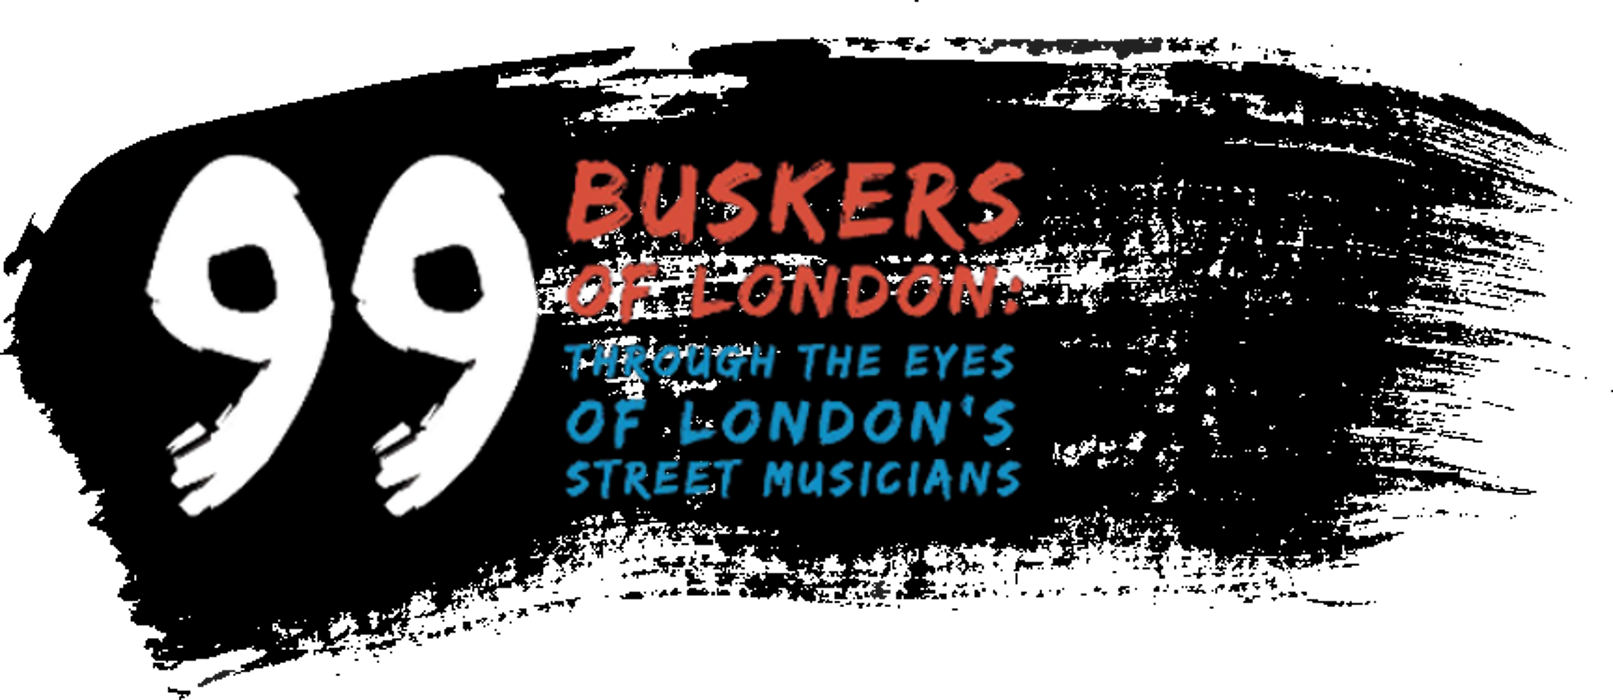 99 Buskers of London